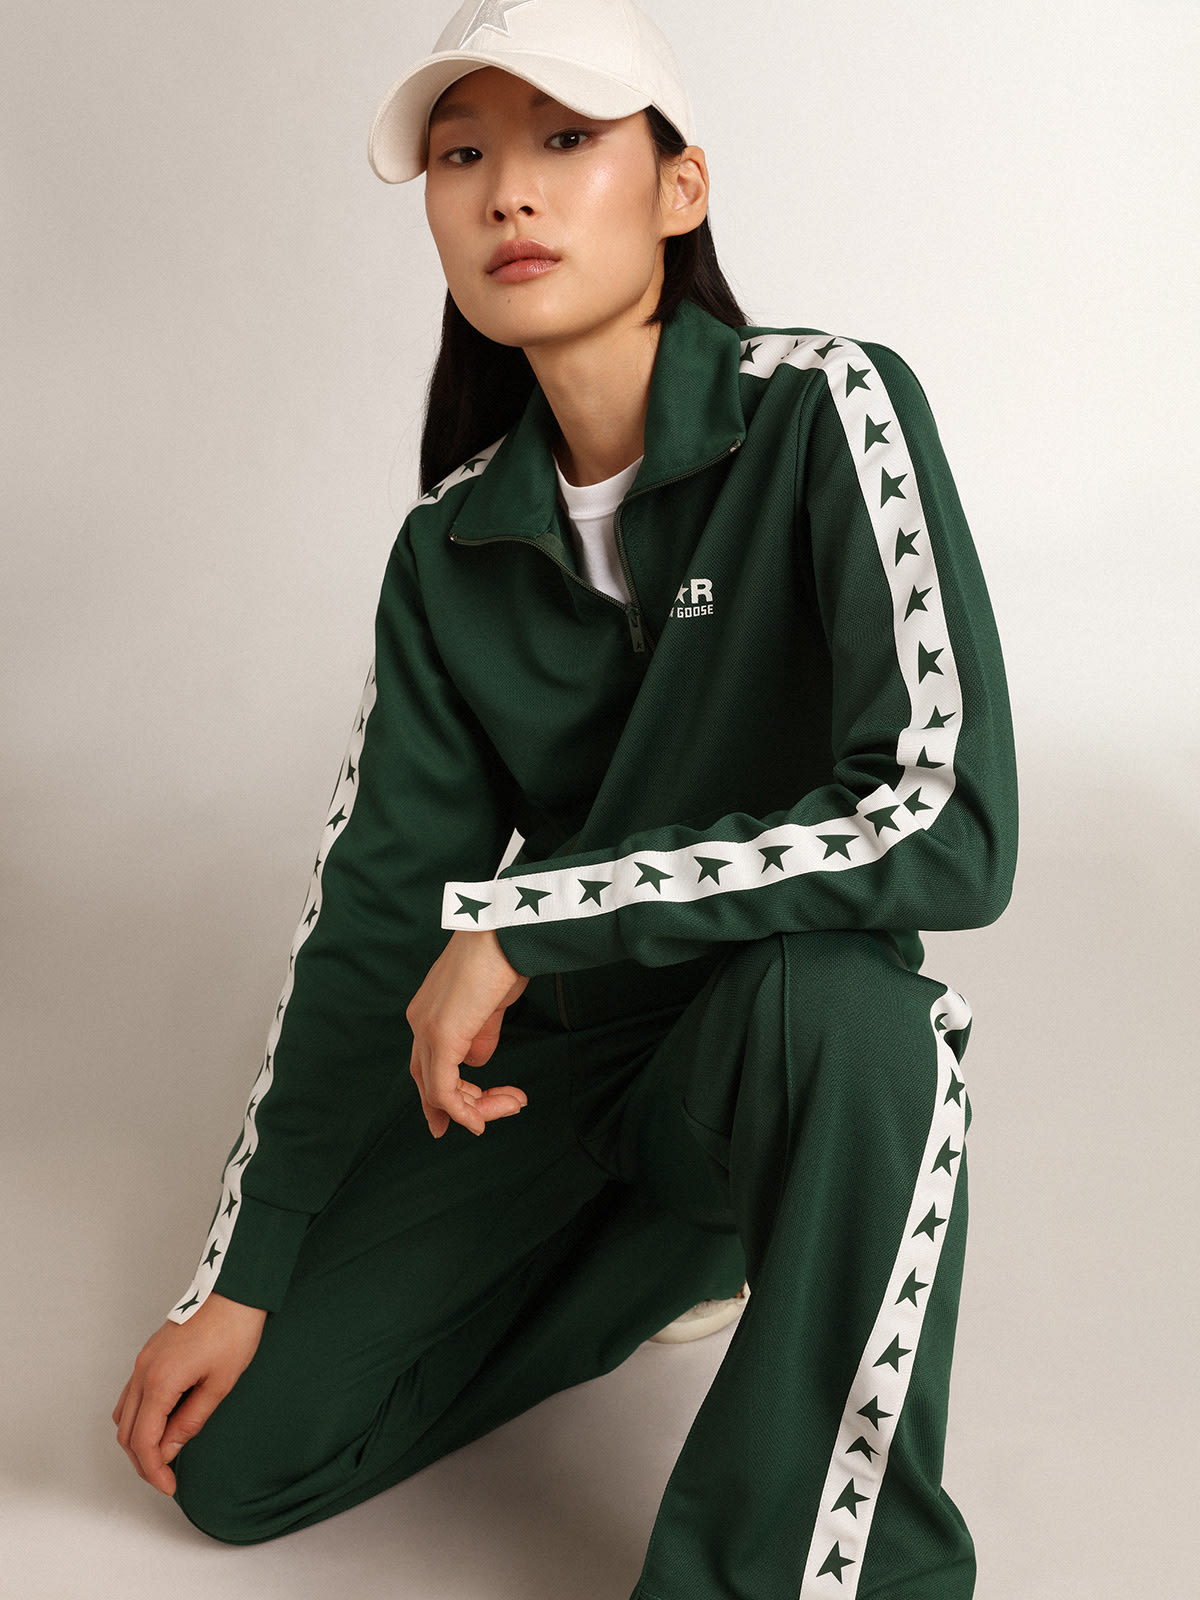 Golden Goose - Women’s green zipped sweatshirt with white strip and contrasting stars in 